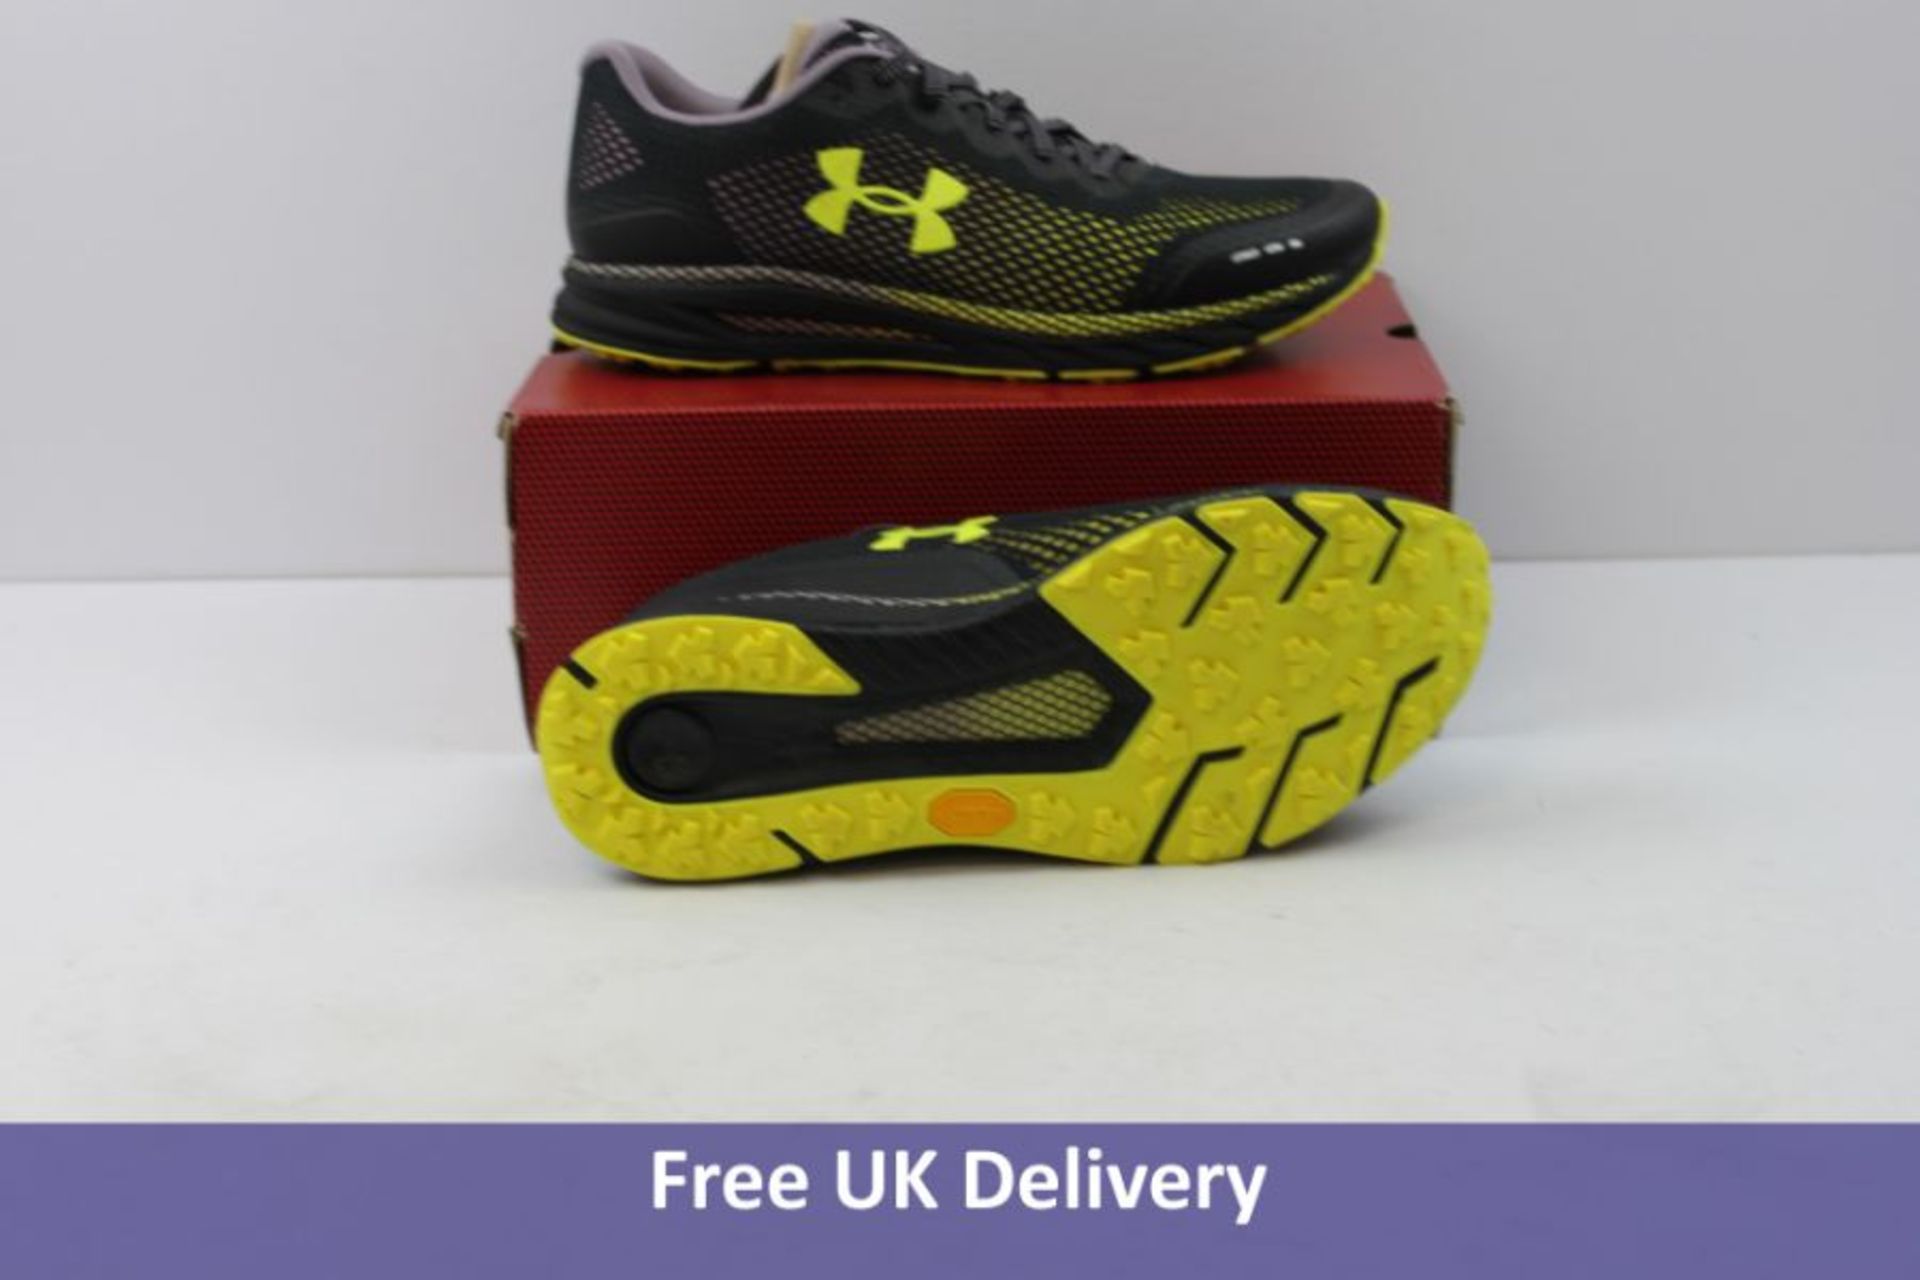 Under Armour Men's Hovr Velociti Trail Trainers, Black and Yellow, Size 10